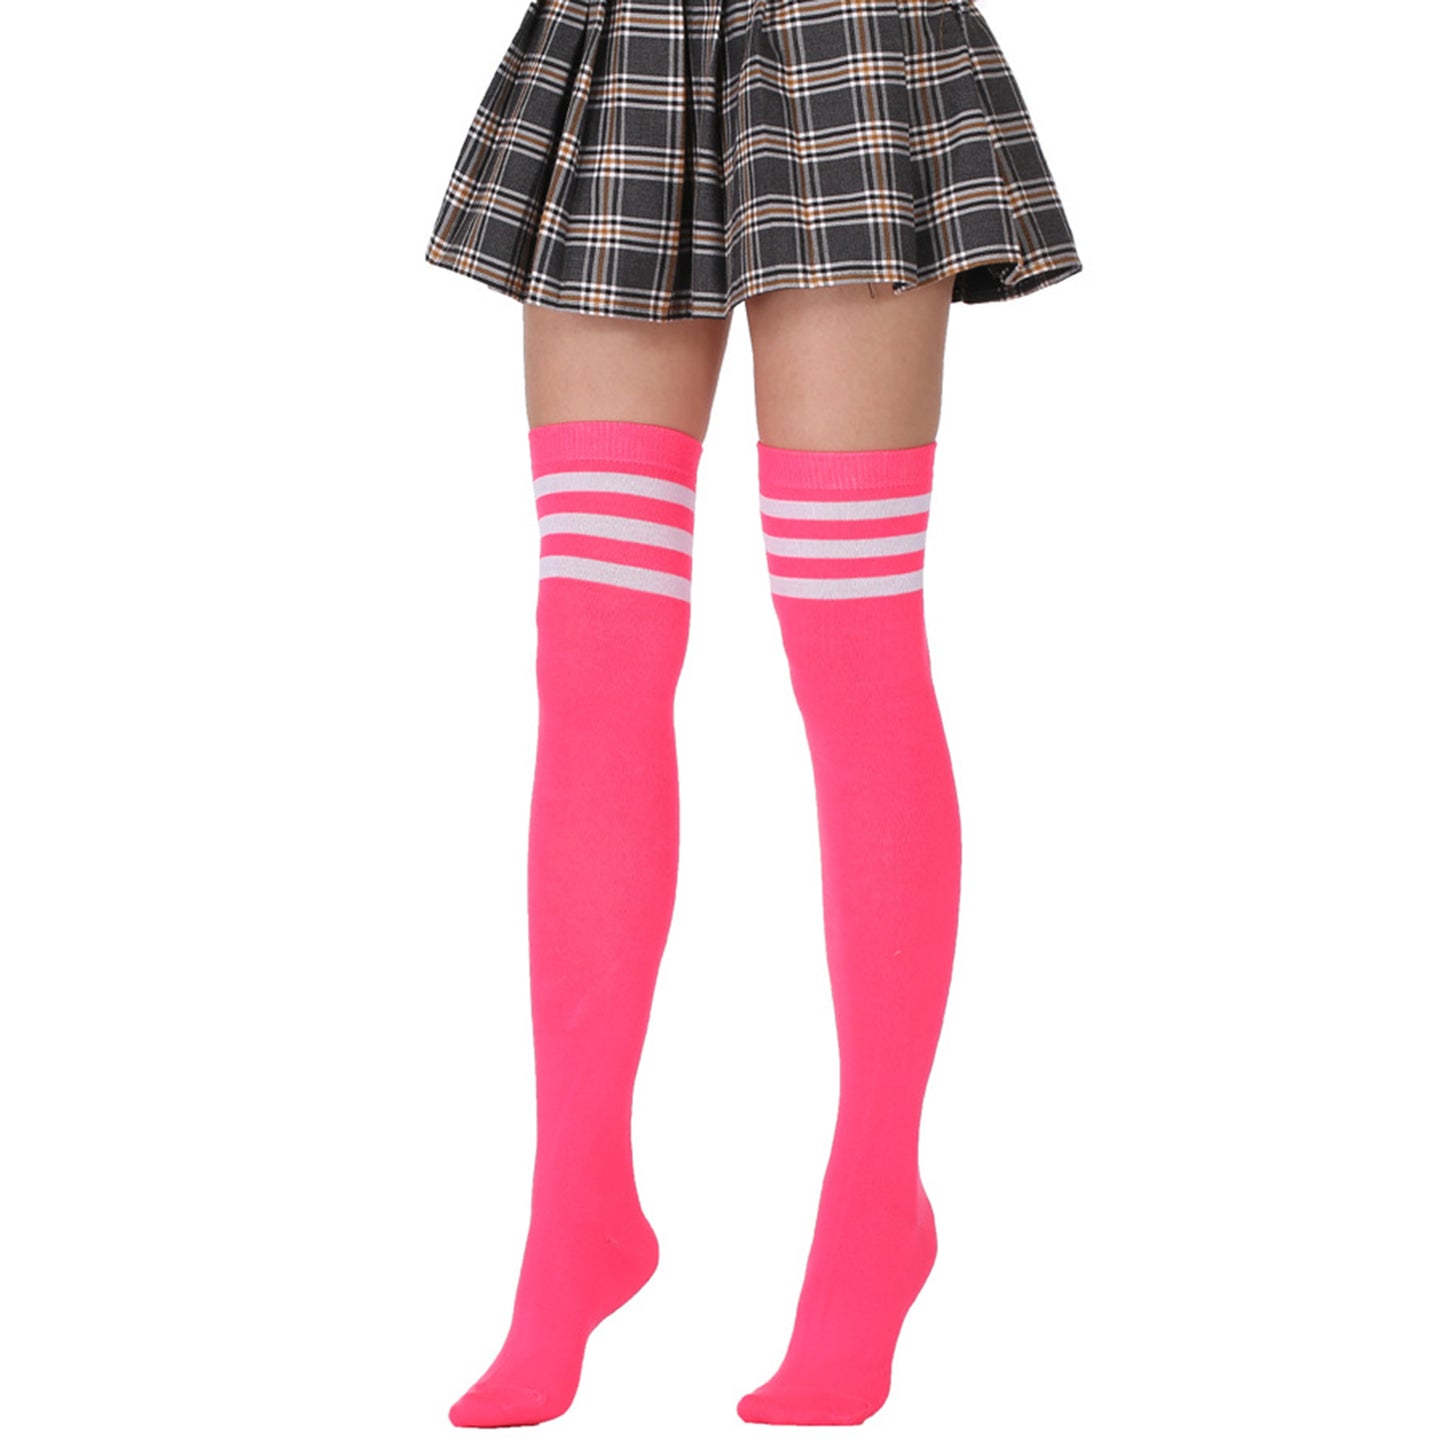 Solid Fluorescent Color Thigh High Socks